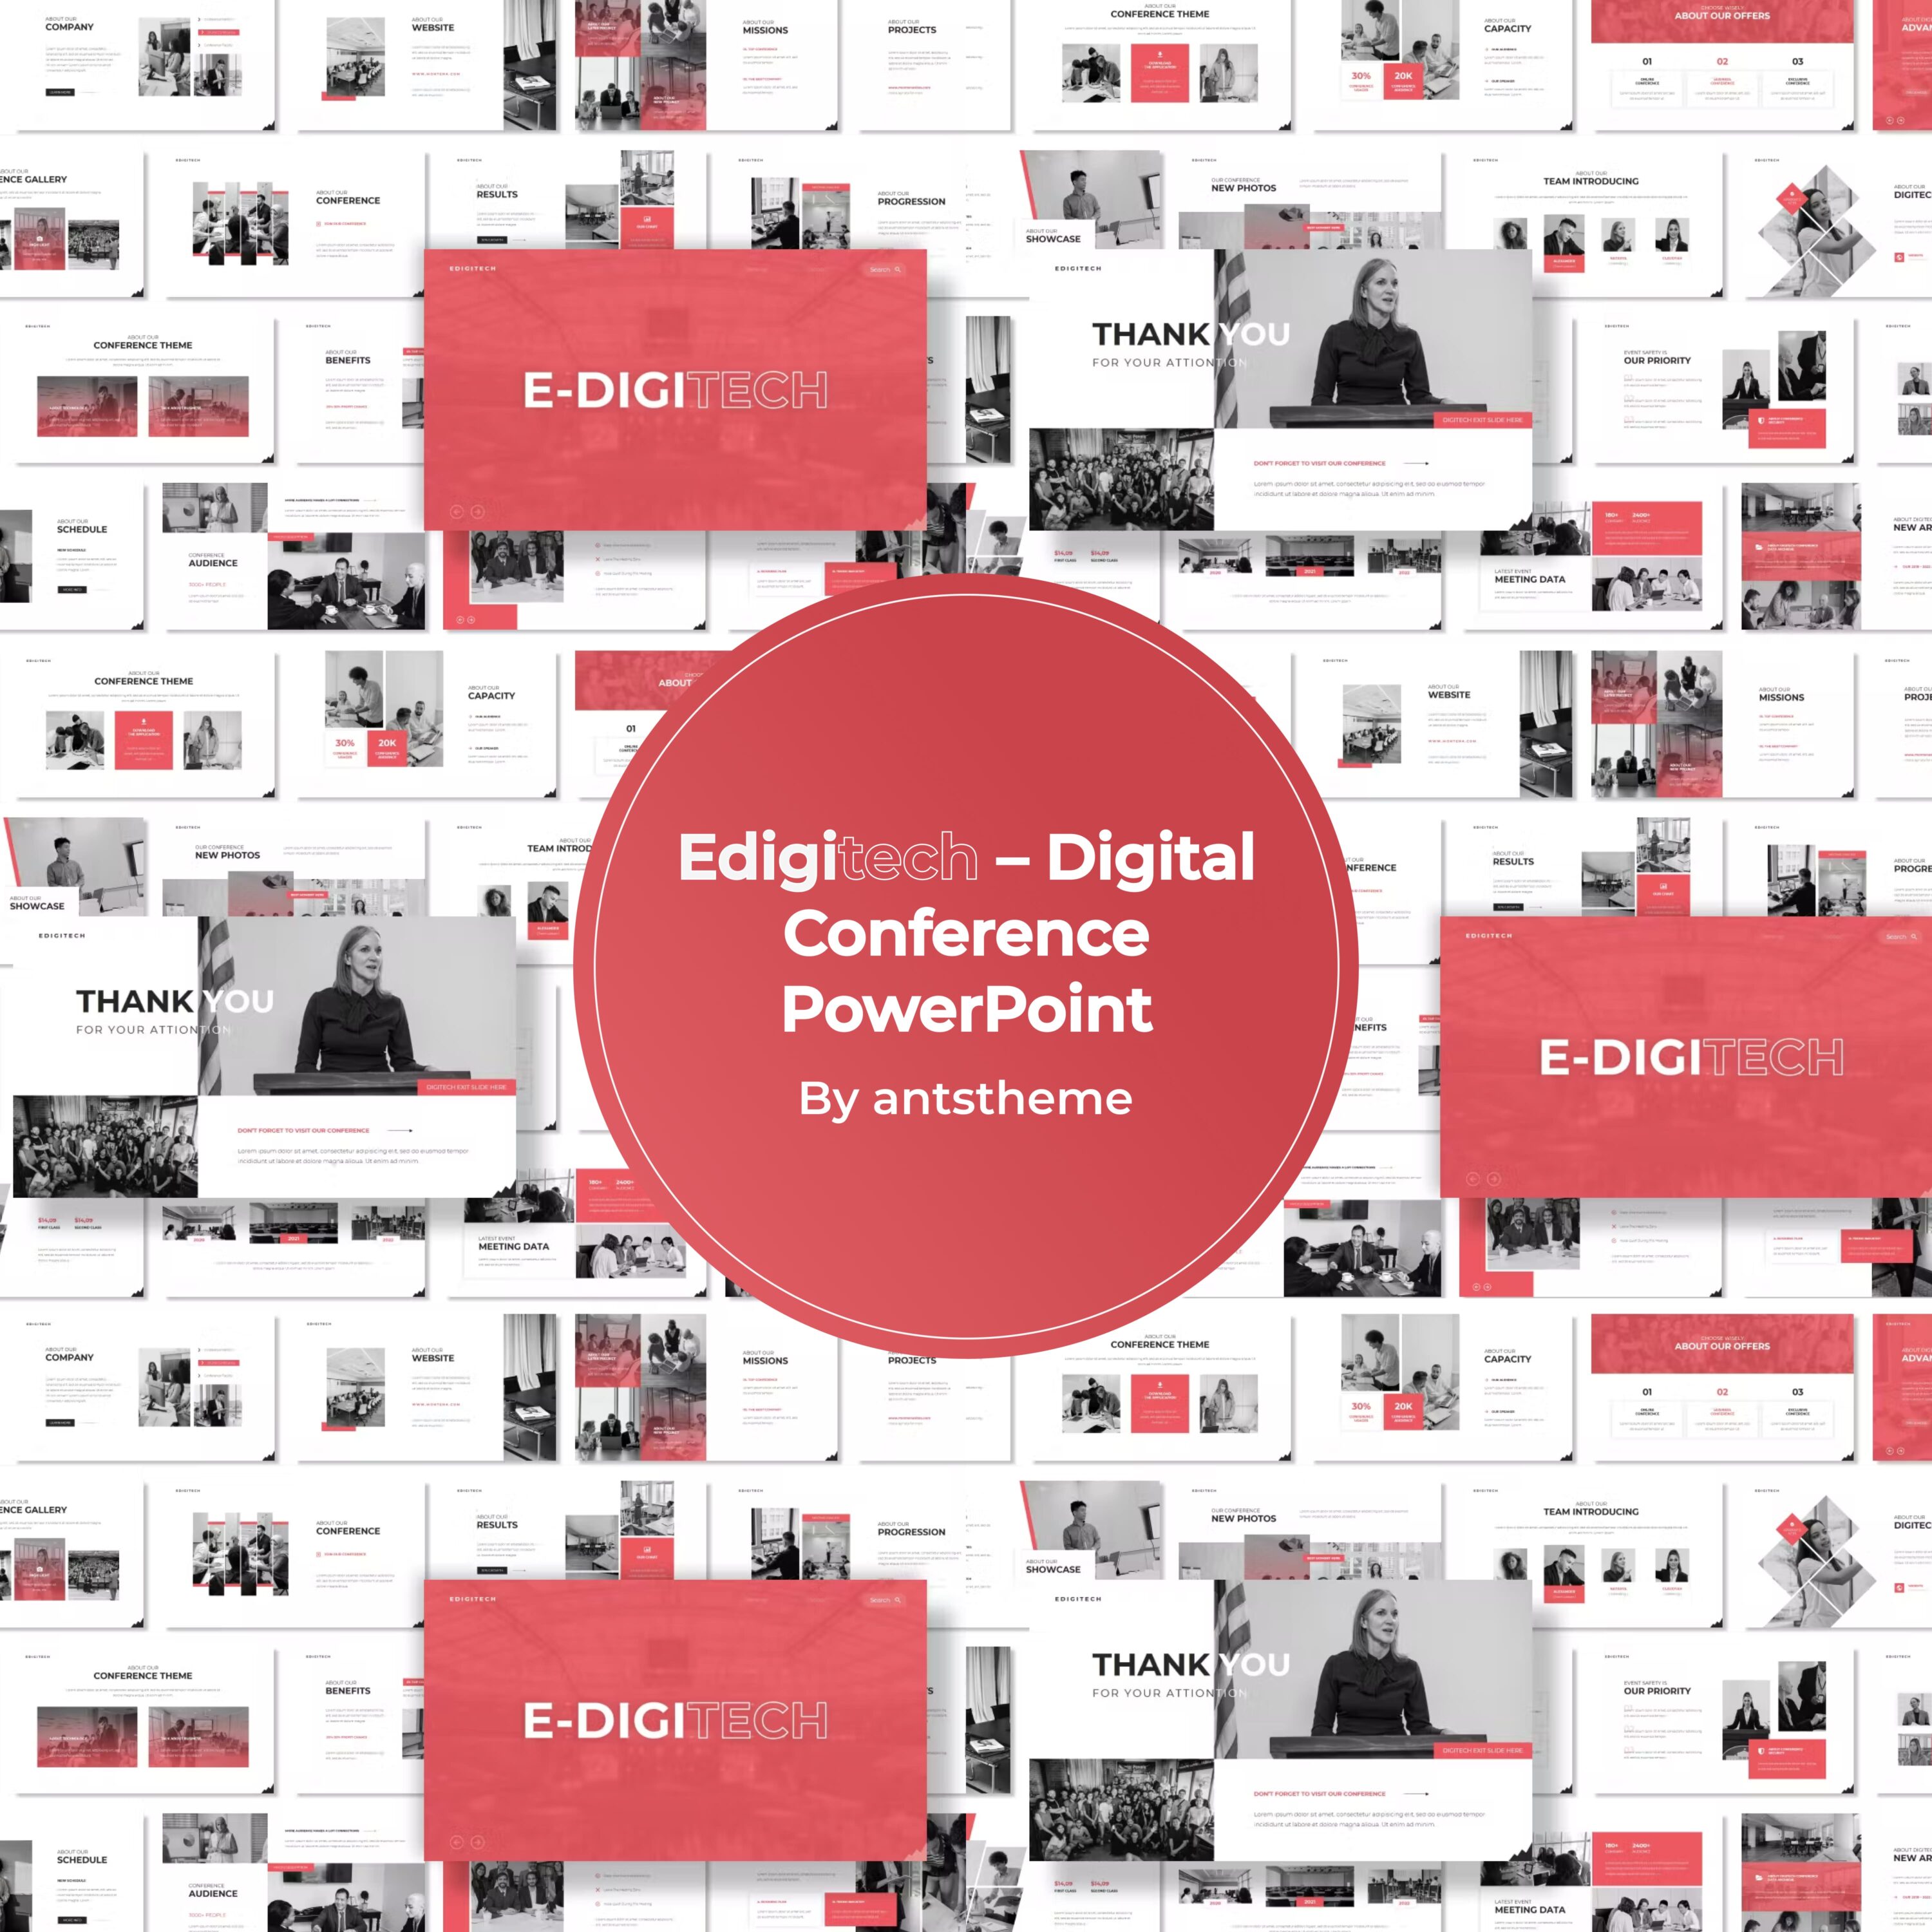 Edigitech Digital Conference PowerPoint - main image preview.